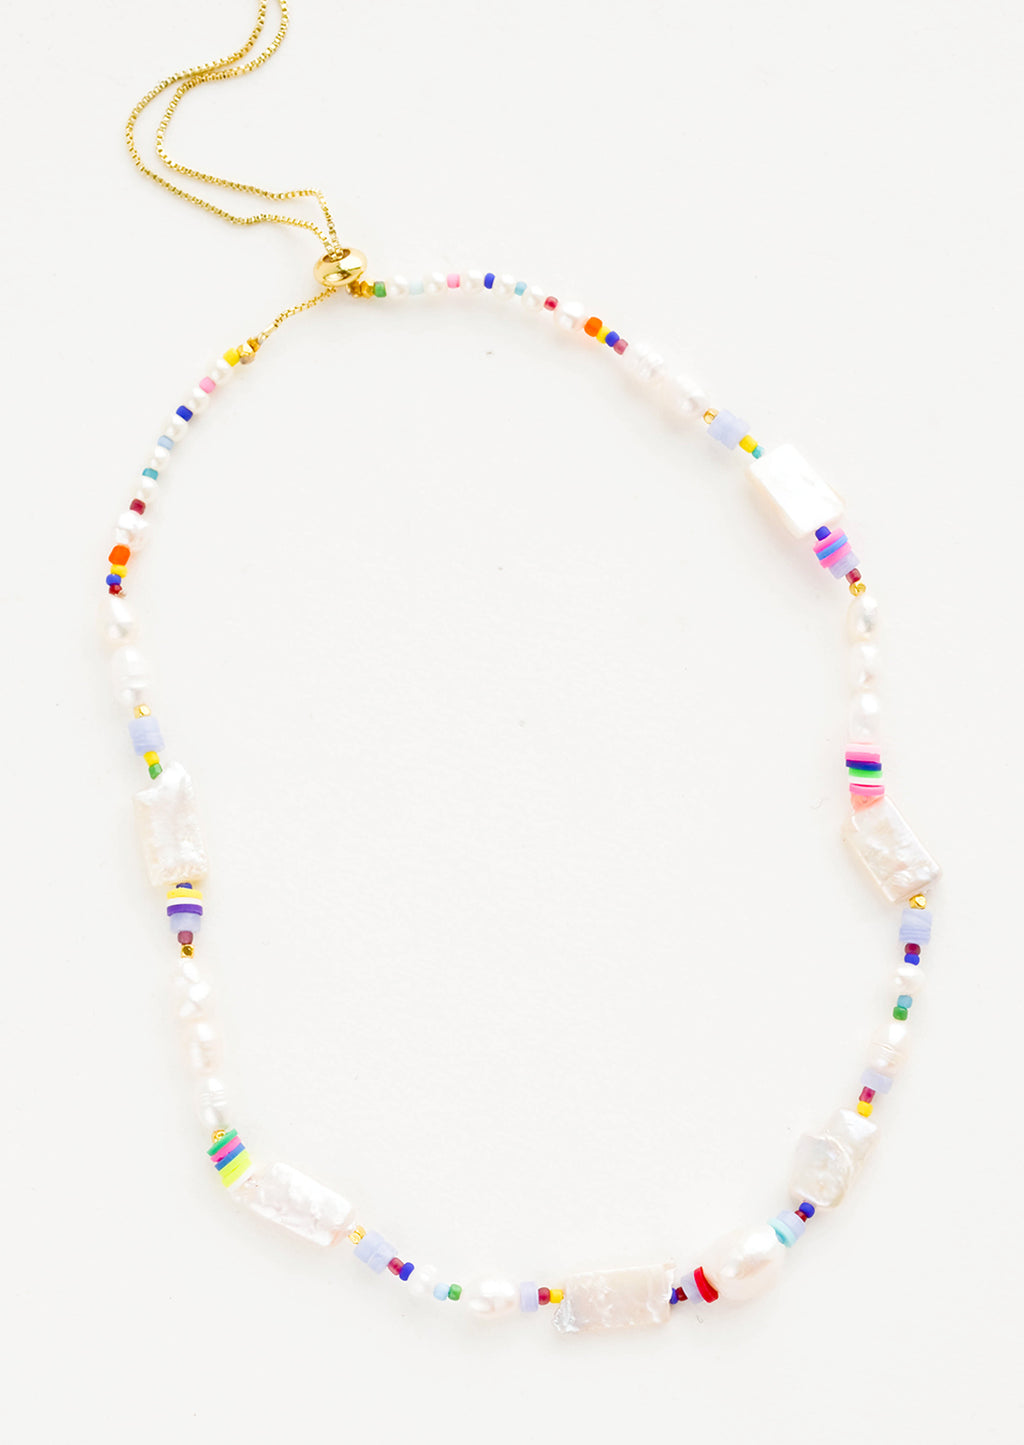 1: Beaded necklace with square freshwater pearls, multicolor heishi beads and colored seed beads on gold box chain